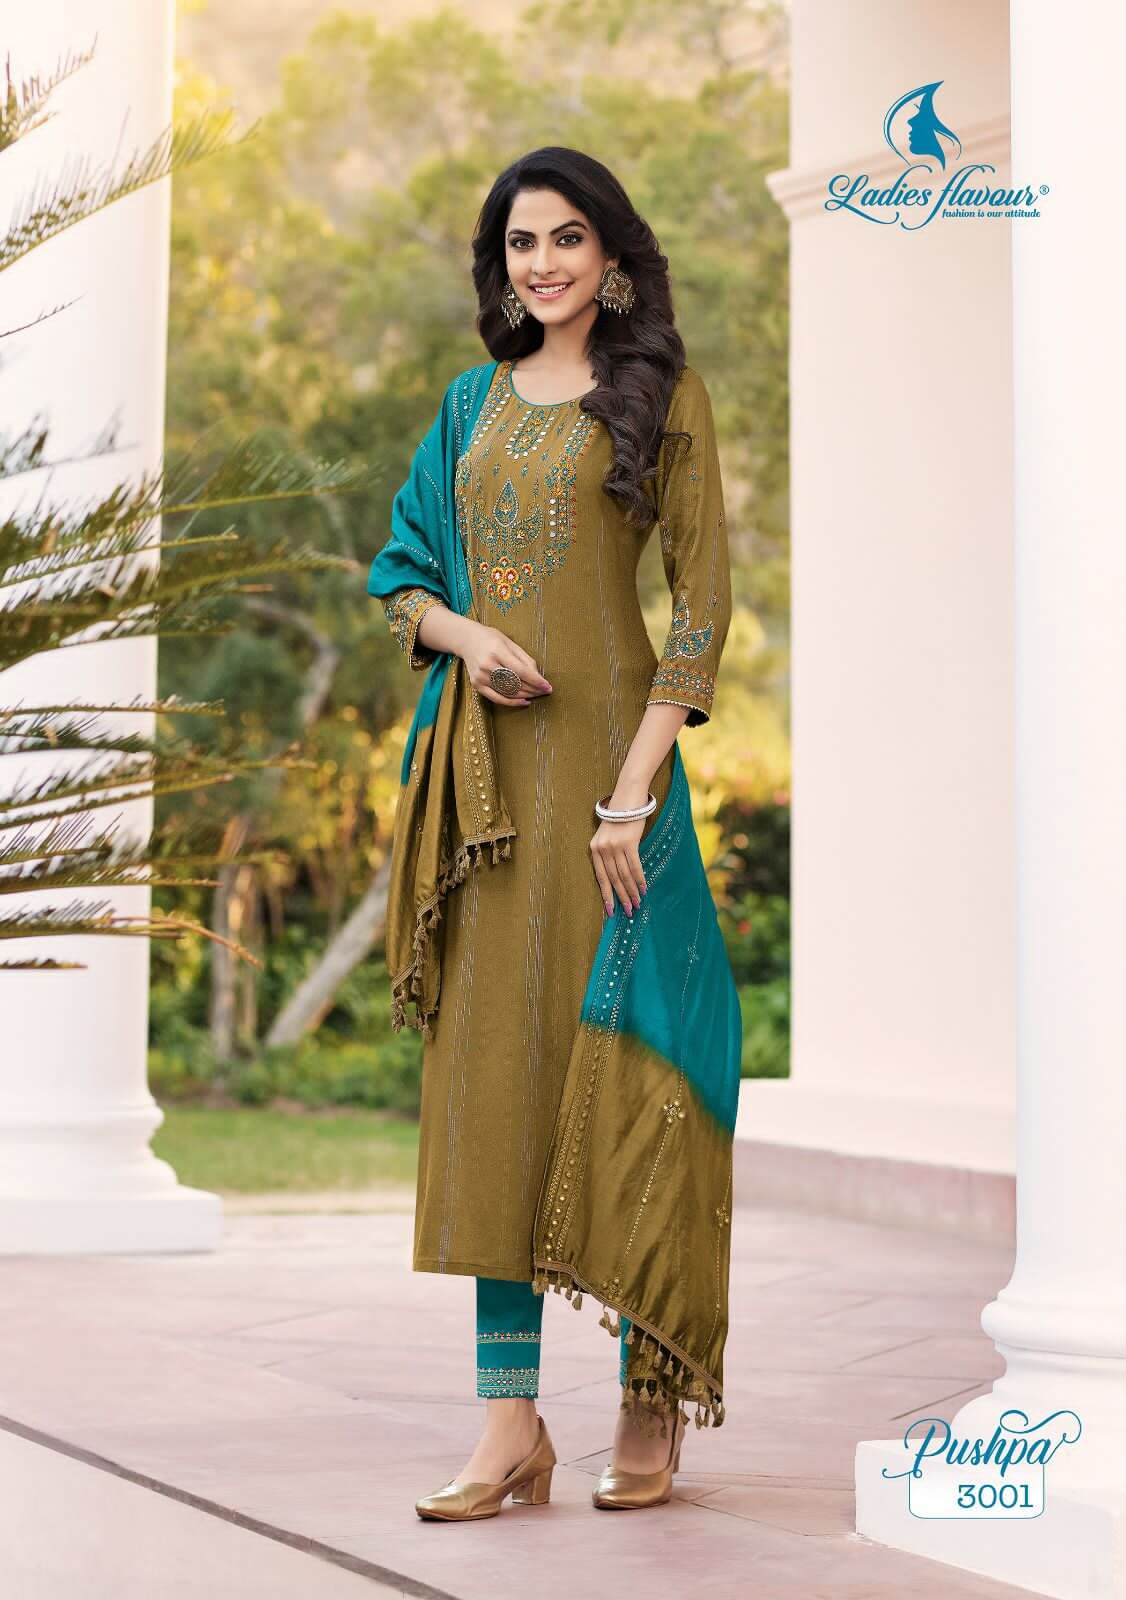 Ladies Flavour Pushpa vol 3 Readymade Dress Catalog collection 2